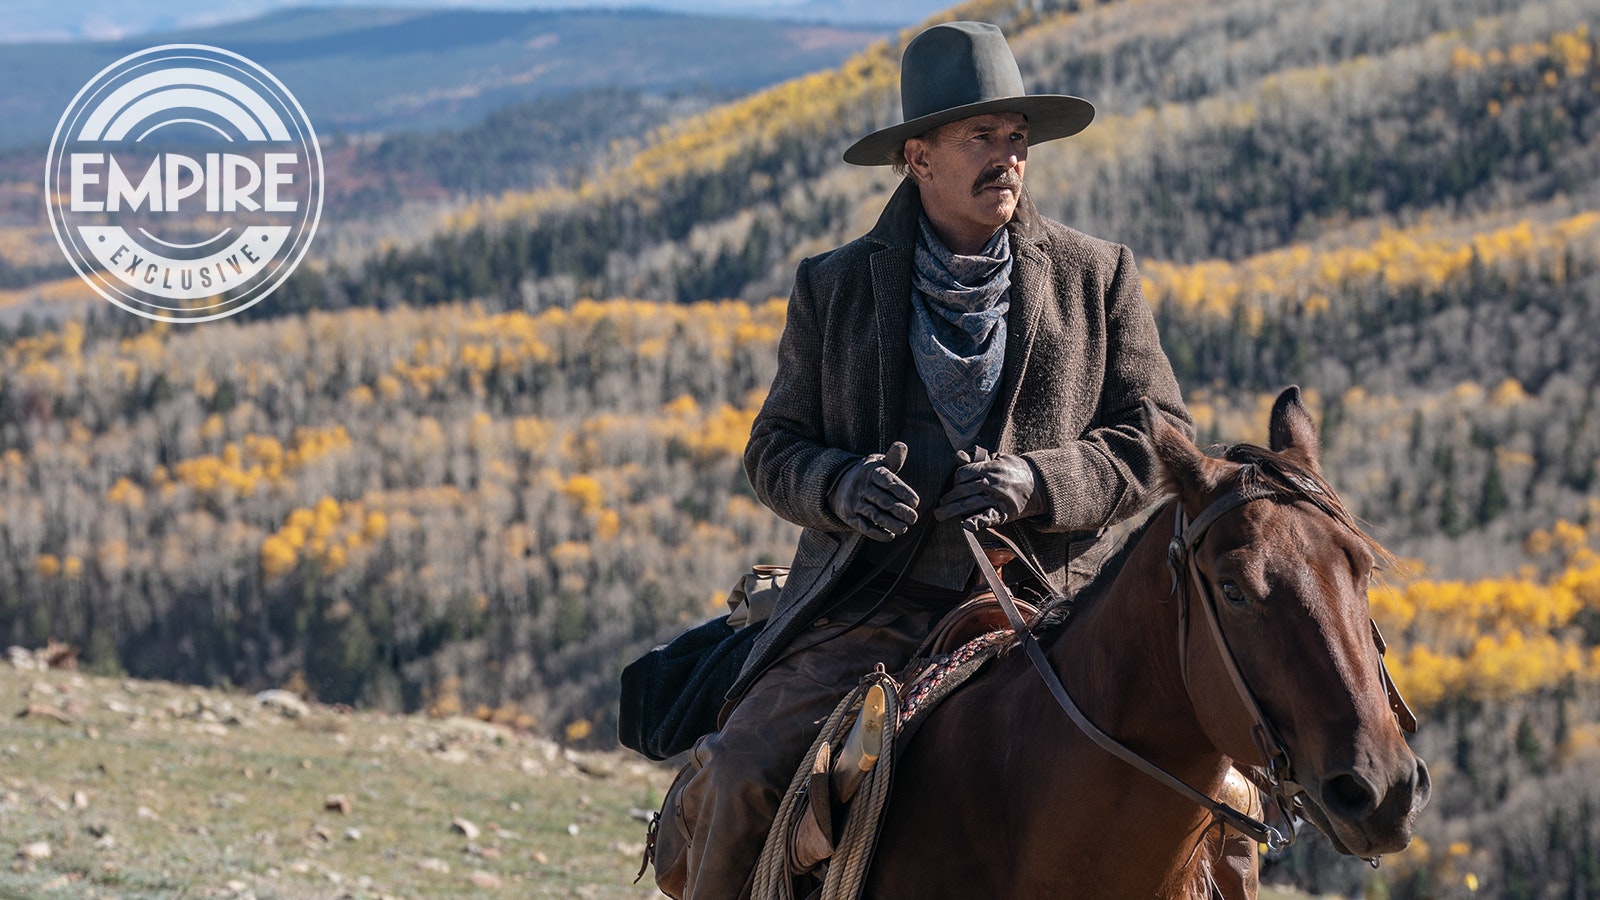 Kevin Costner's $100 Million Western 'Horizon: An American Saga - Part 1' Faces Uncertain Future with Mixed Reviews and Low Opening Weekend Projections